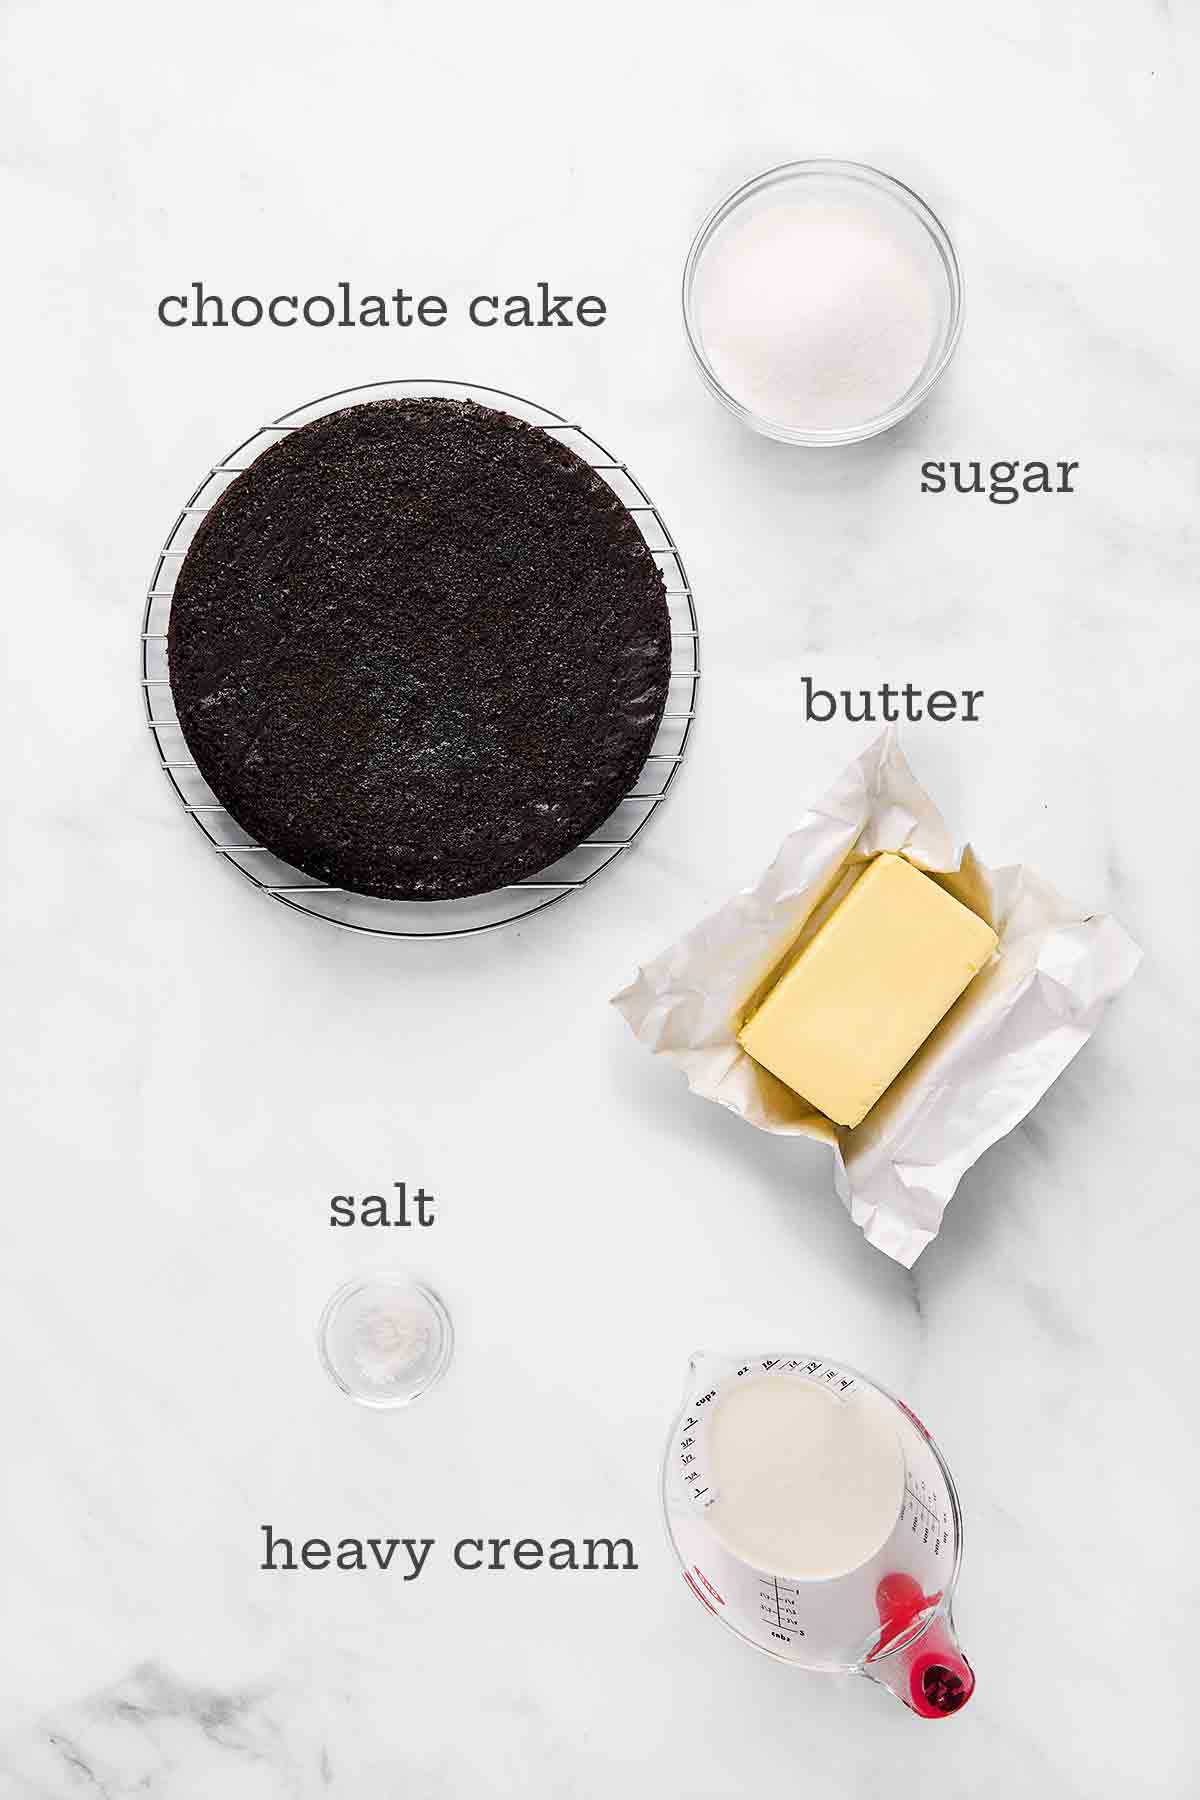 Ingredients for chocolate caramel cake--chocolate cake, sugar, butter, salt, and heavy cream.